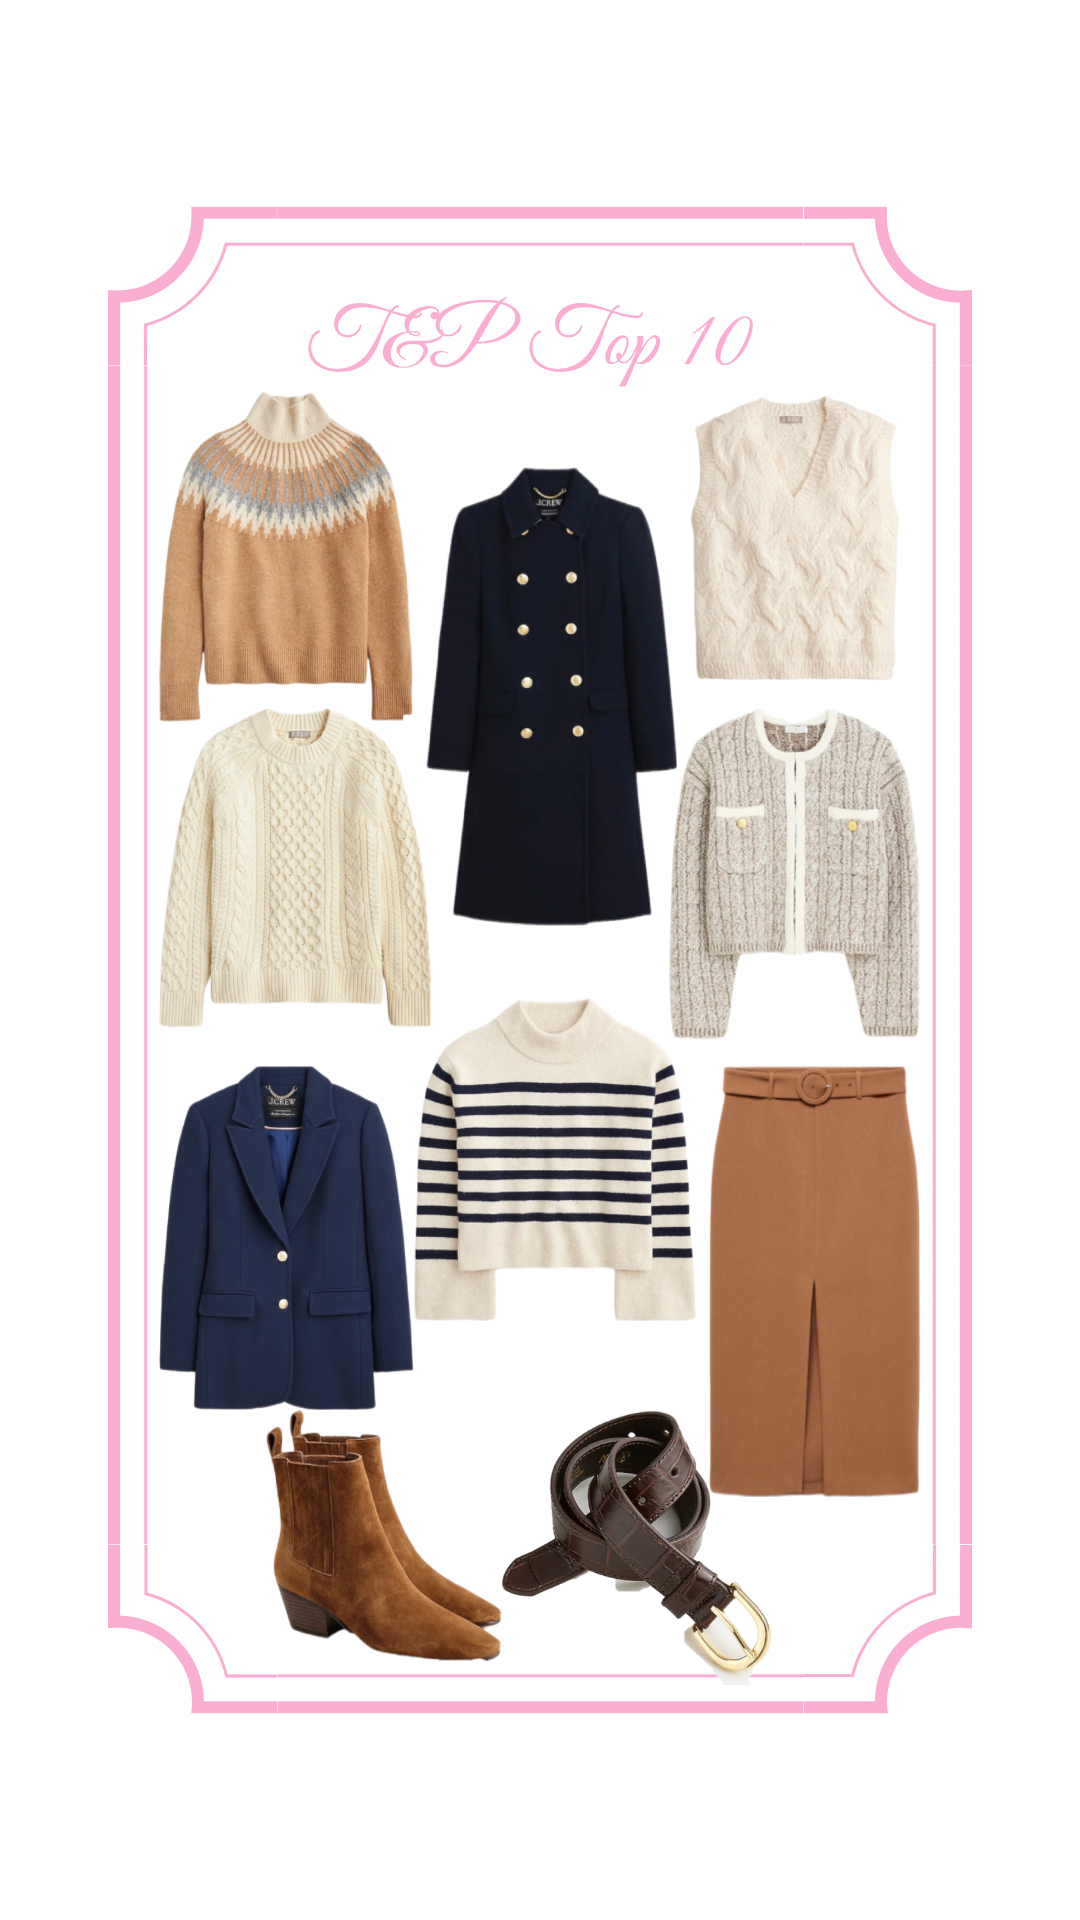 T&P's Top 10 of the Week | No. 74 | Striped Sweater, Classic Winter Coat, Fair Isle, Cable Knit Sweater & Browns